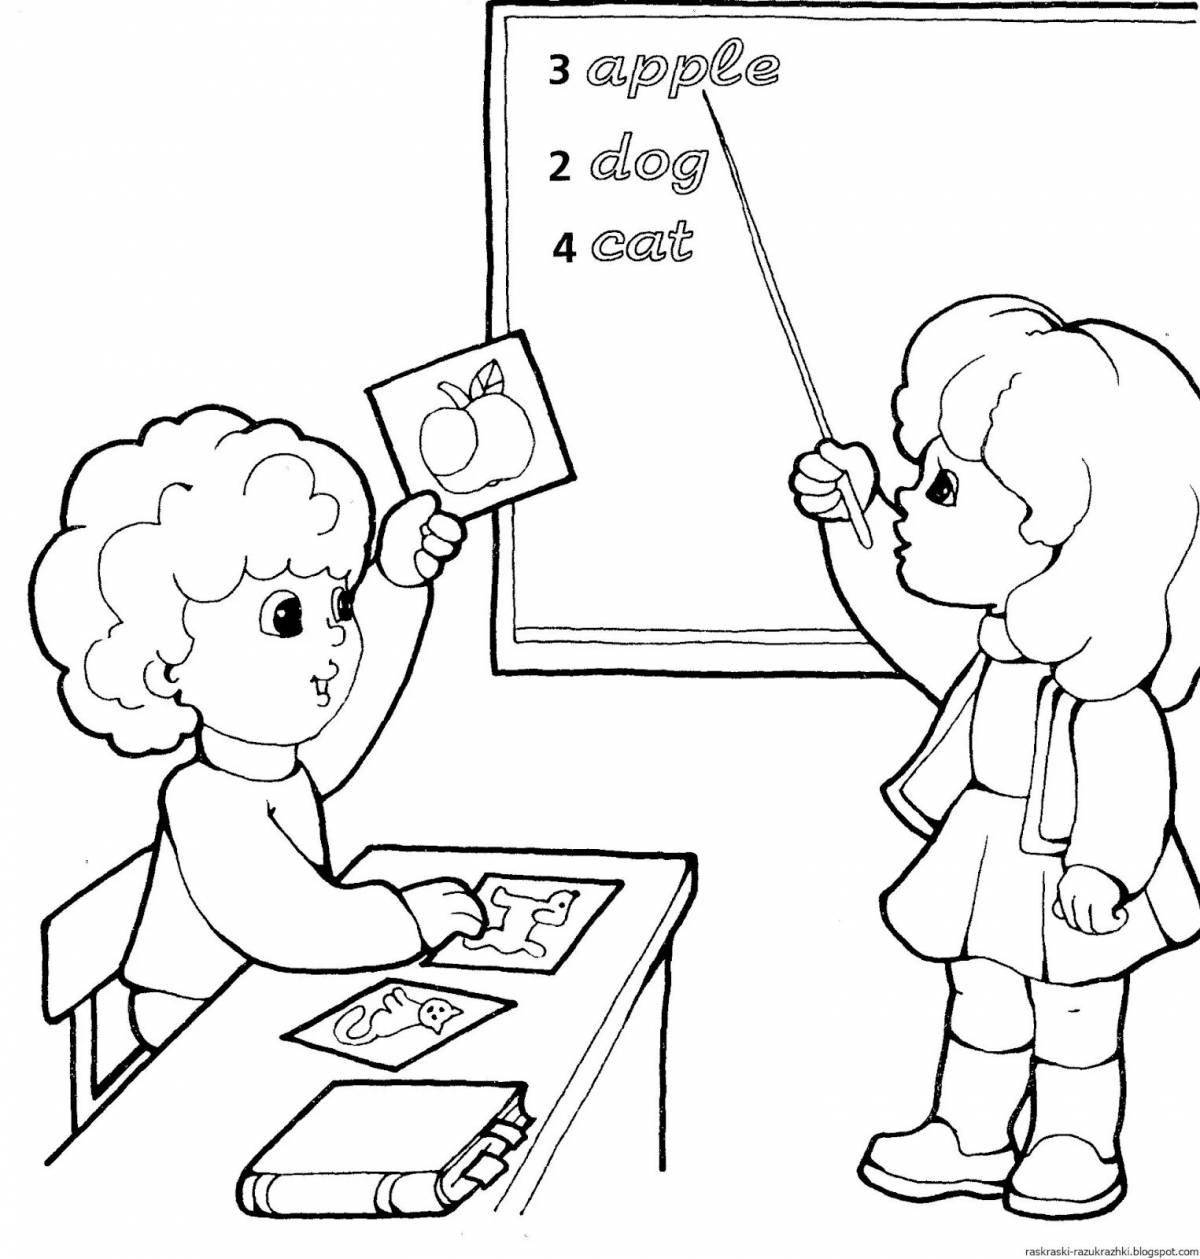 Colored twinkling classroom coloring page